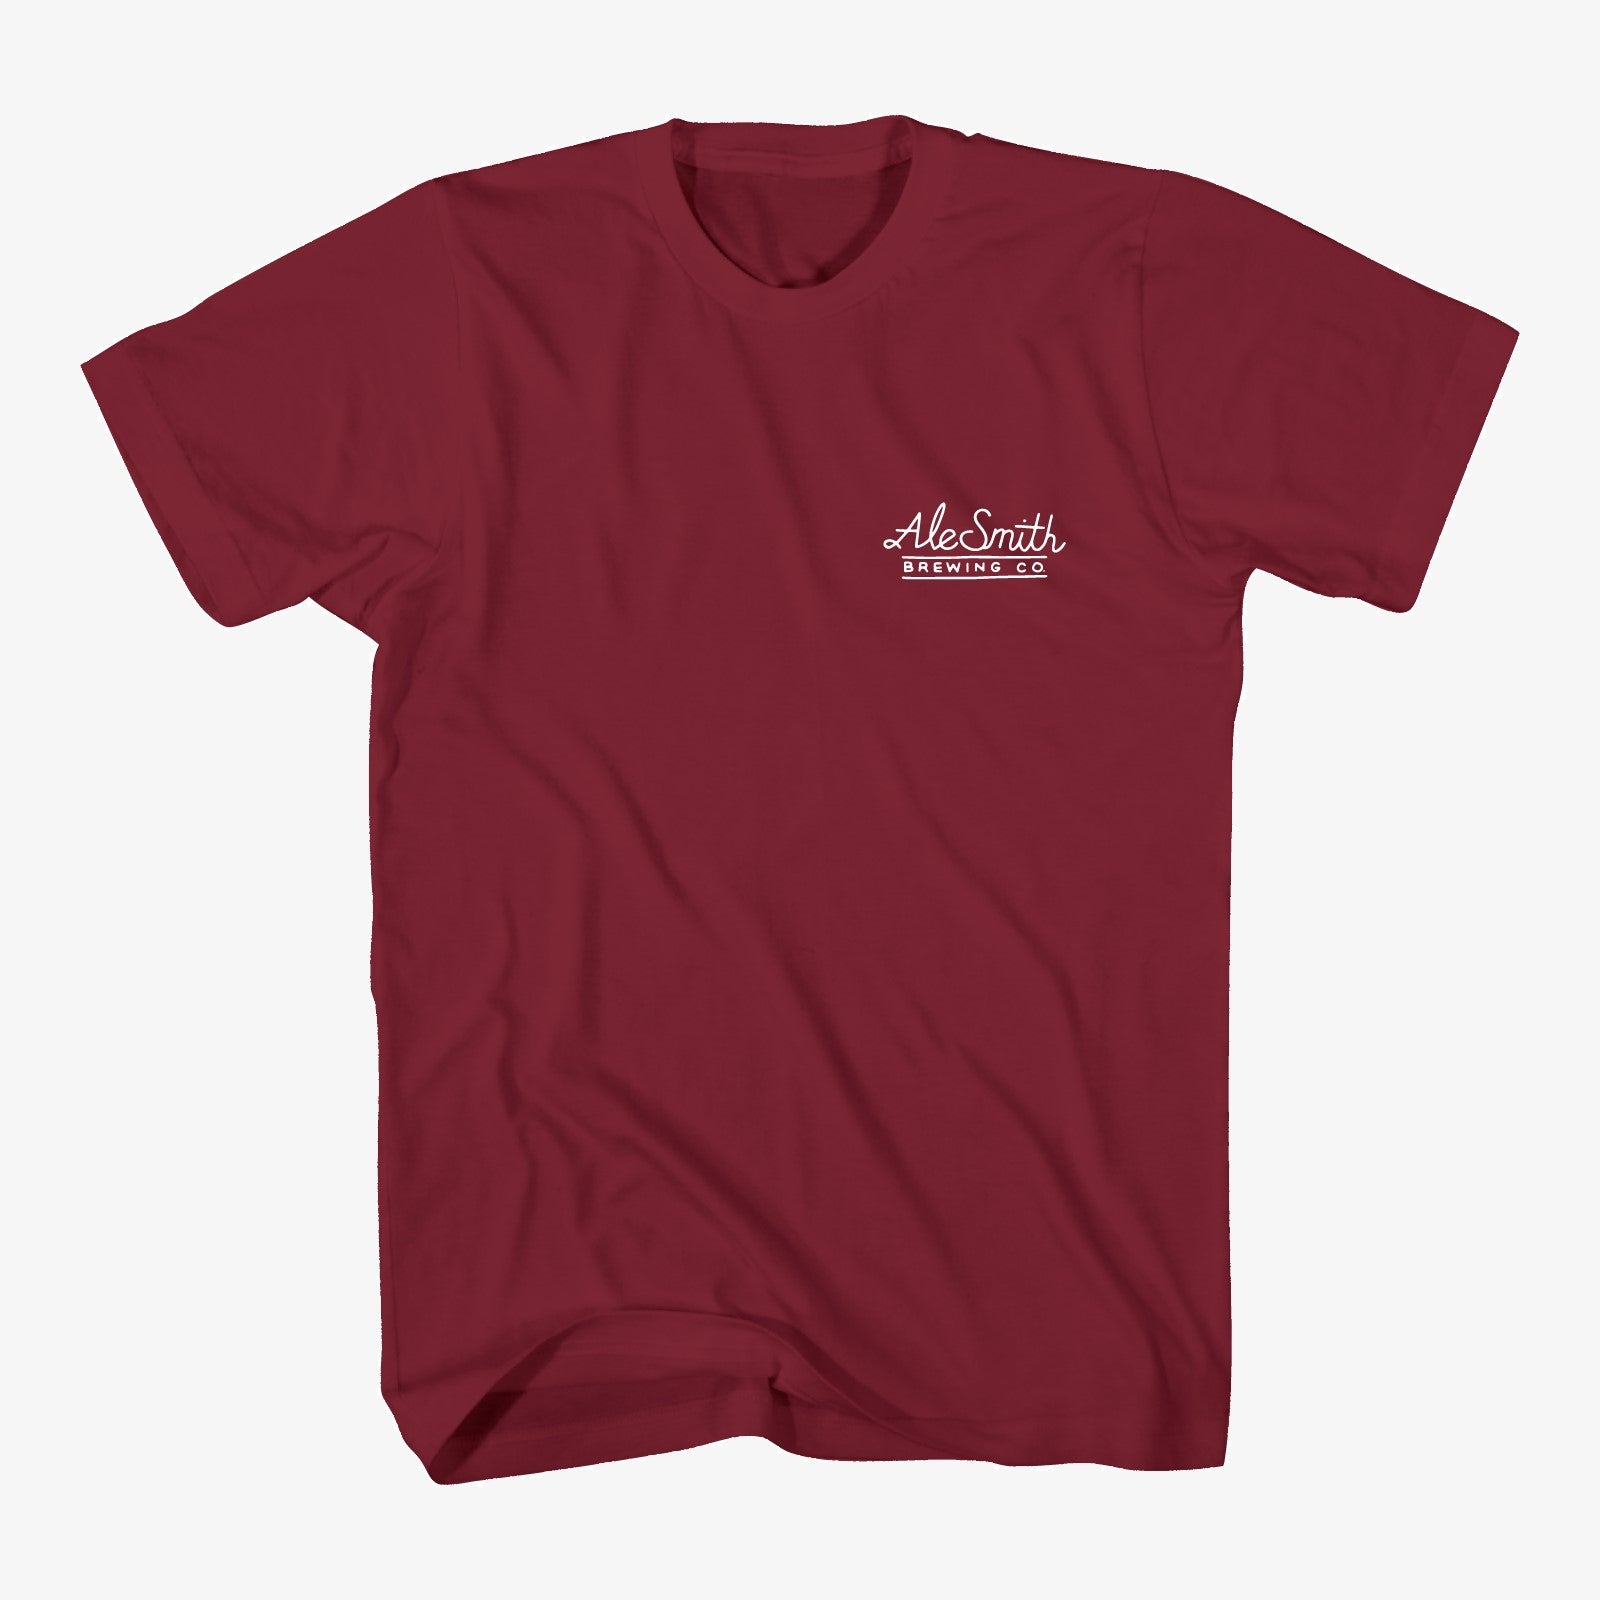 Diner Script Tee - Red - AleSmith Brewing Co.